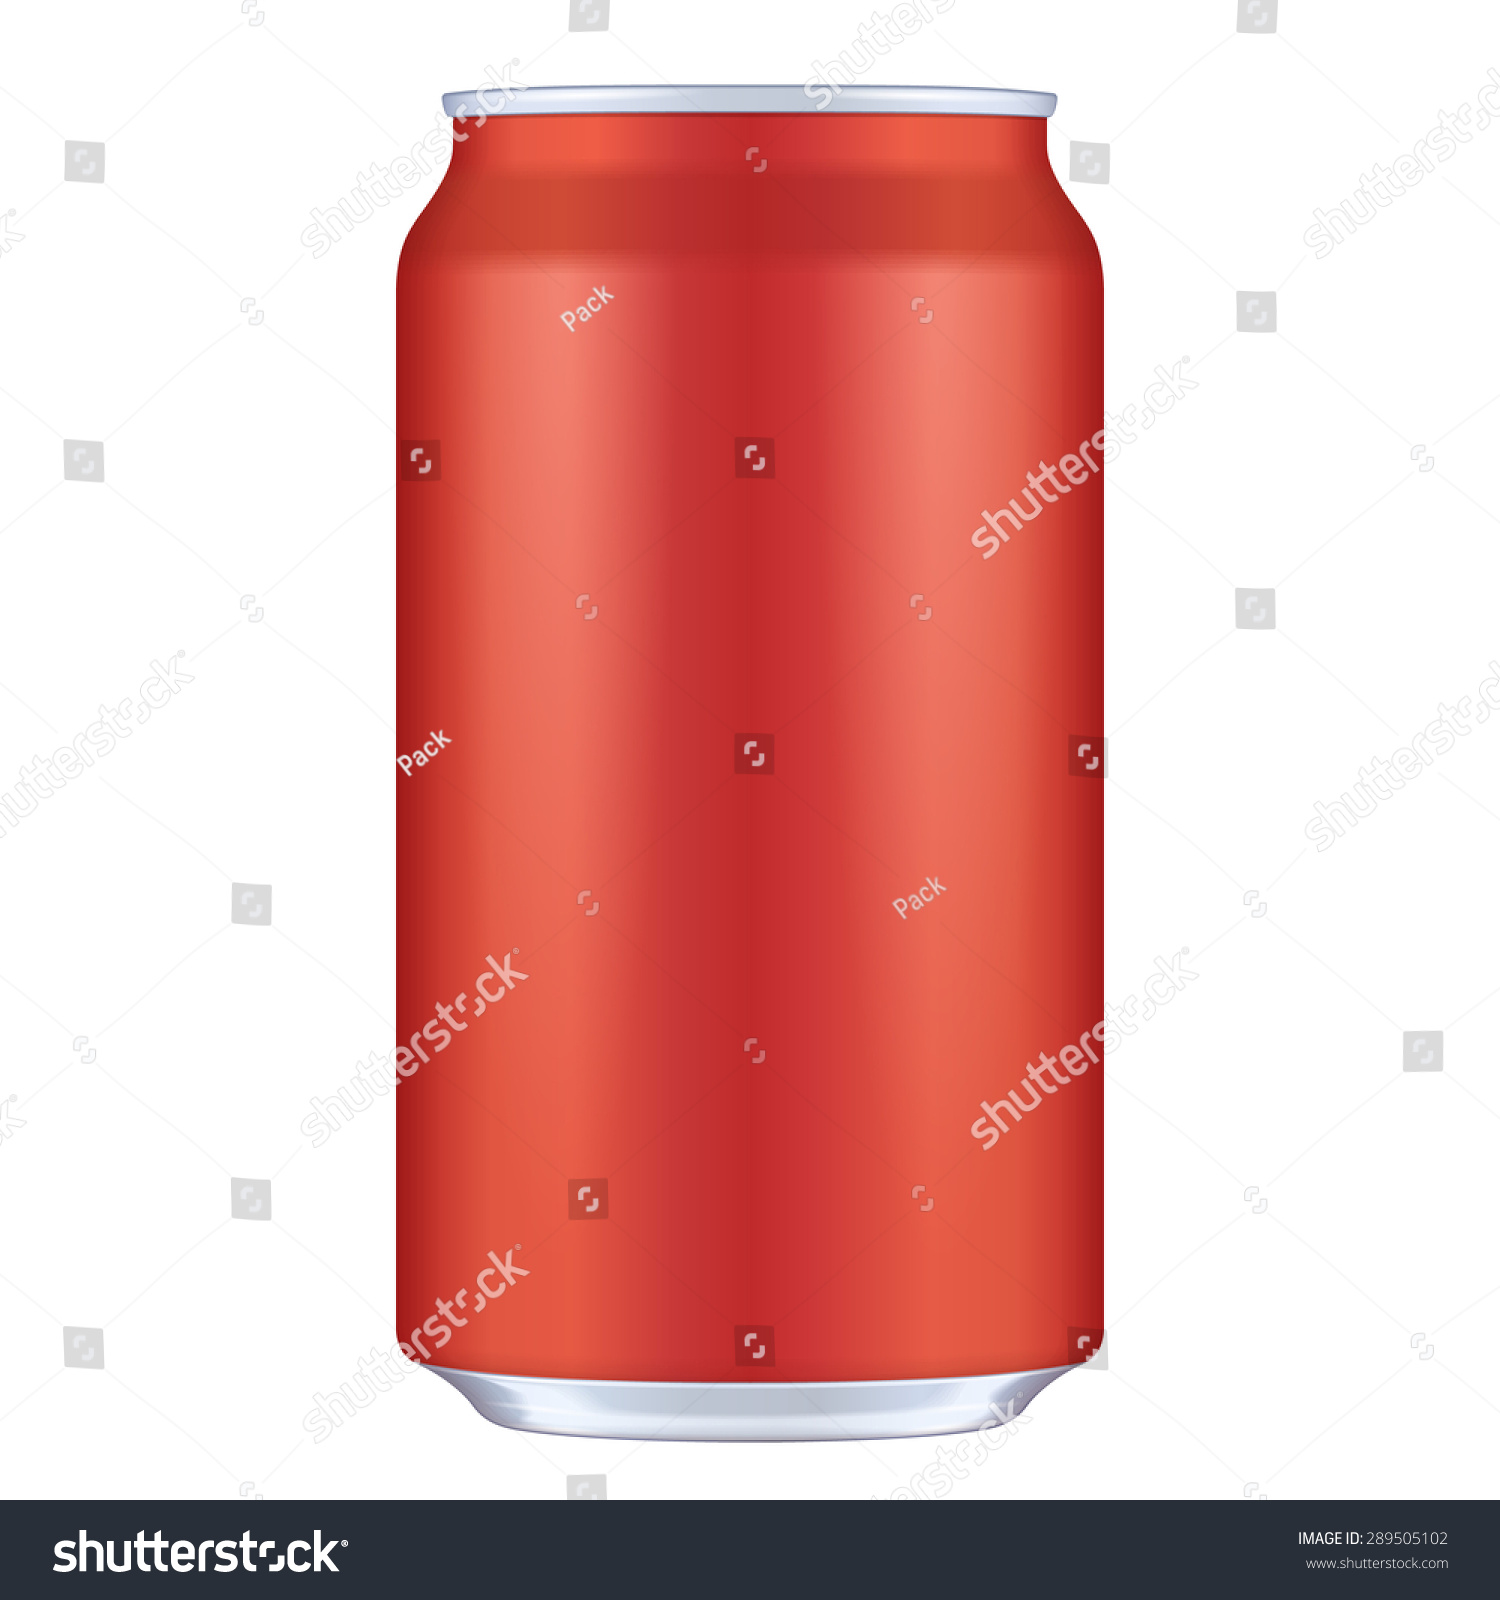 SVG of Red Blank Metal Aluminum Beverage Drink Can. Illustration Isolated. Mock Up Template Ready For Your Design. Vector EPS10 svg